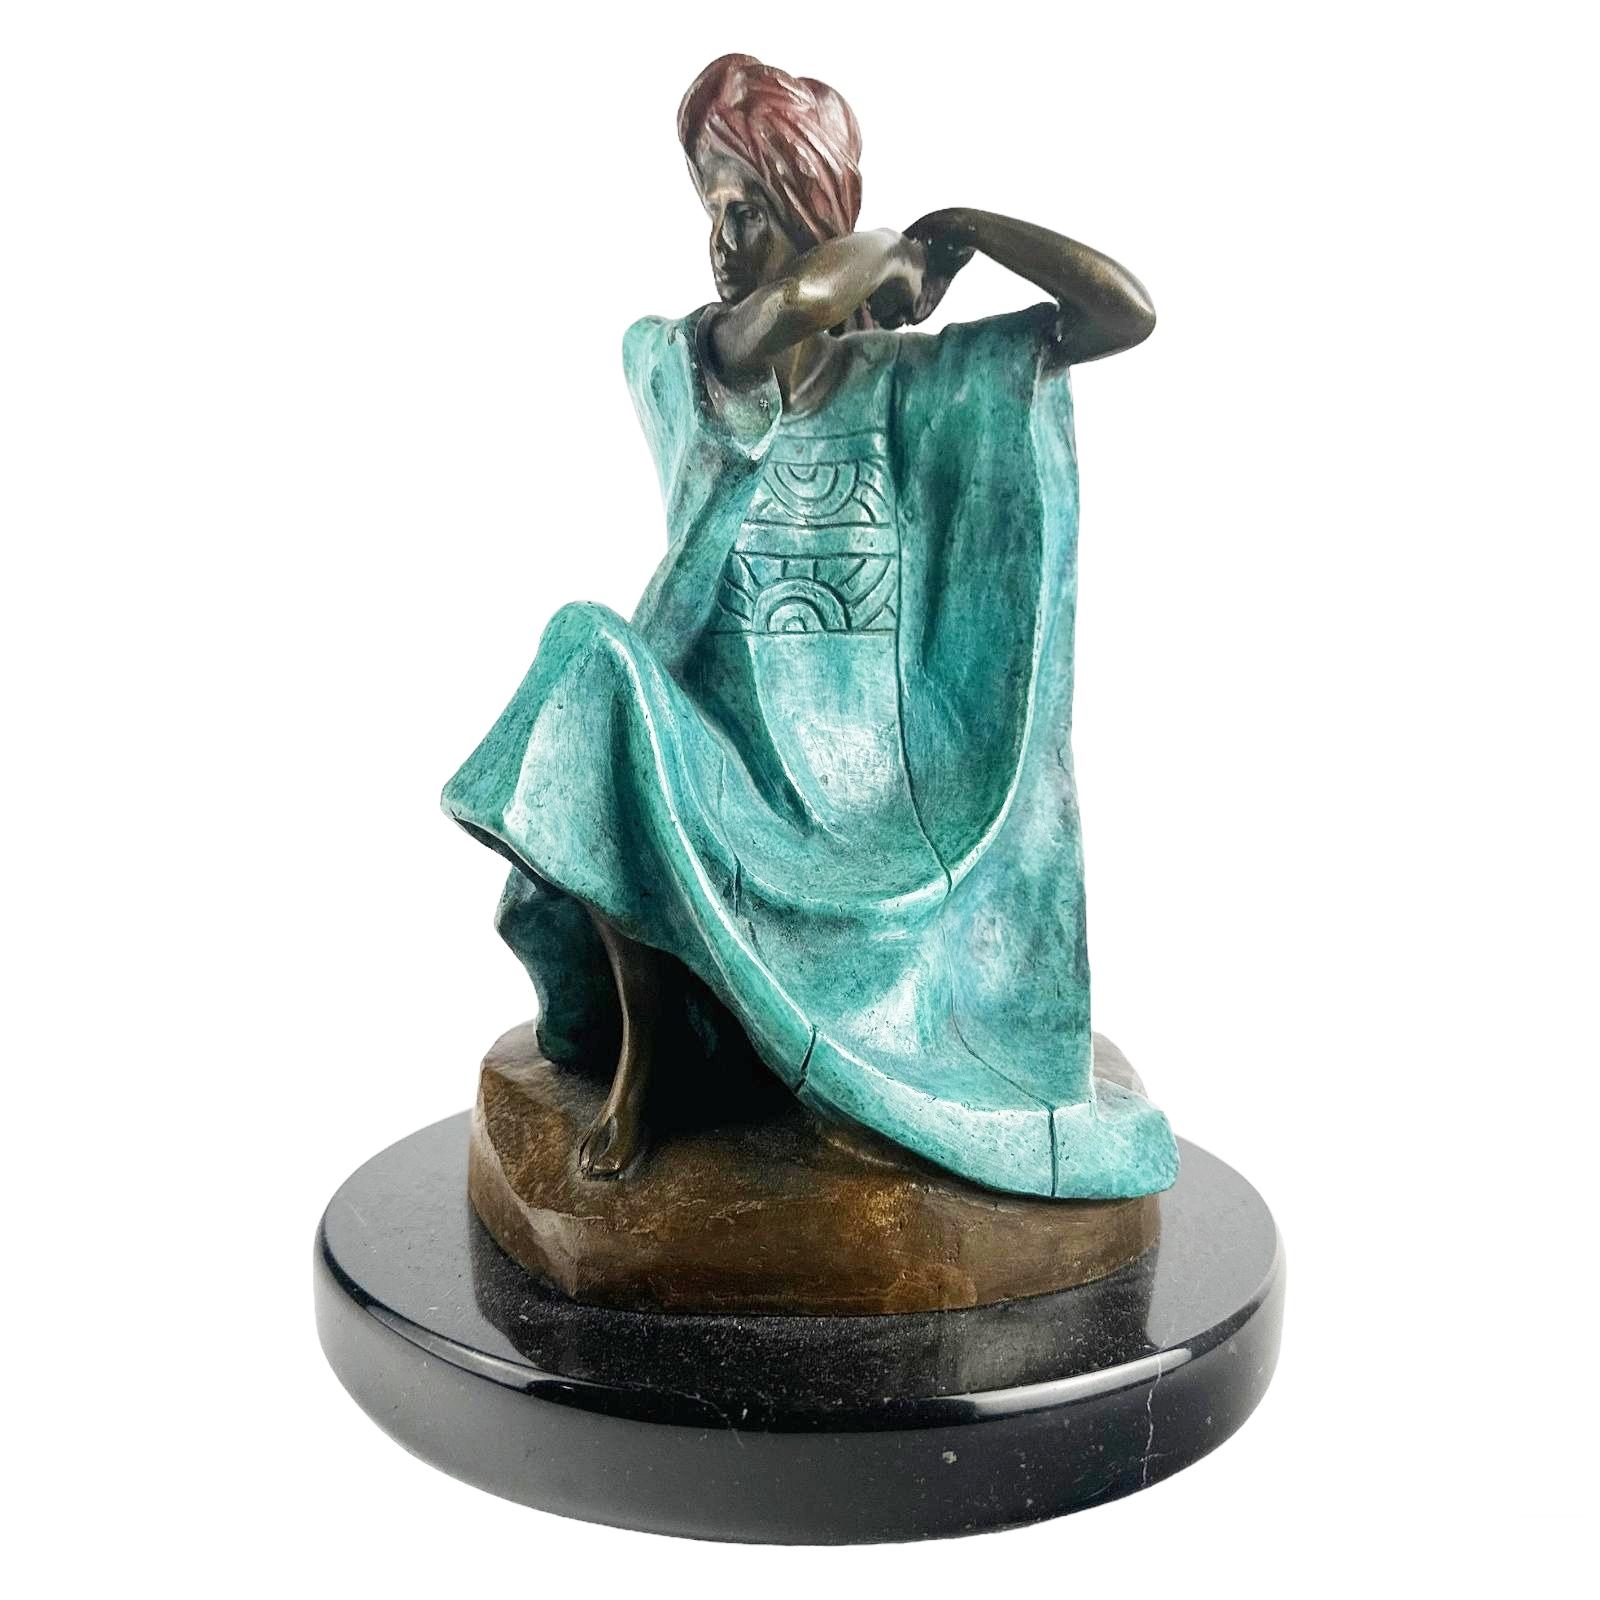 Victor Gutierrez (Mexican, born 1950). A limited edition cold painted bronze statue. A figural work produced in a modern style depicting a seated female figure in traditional Mestizo style costume, with a red turban, modeled on a Modernist base.